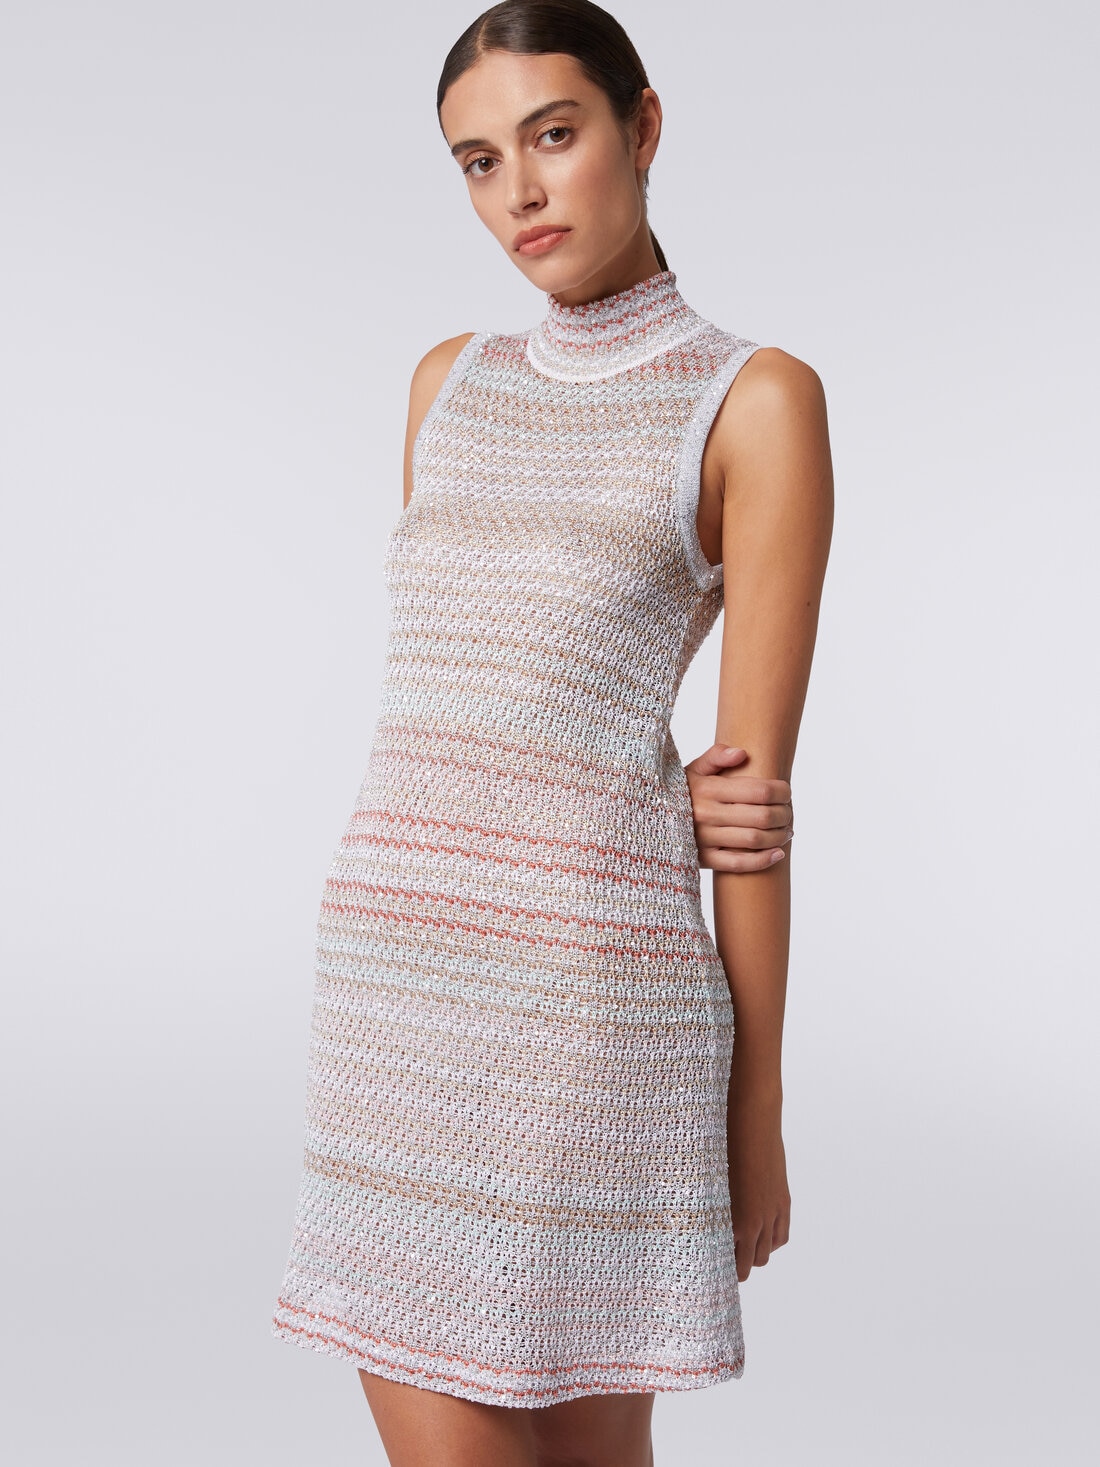 Minidress in mesh knit with high neck and sequin appliqué, Multicoloured  - DS24SG15BK033PSM9AI - 4